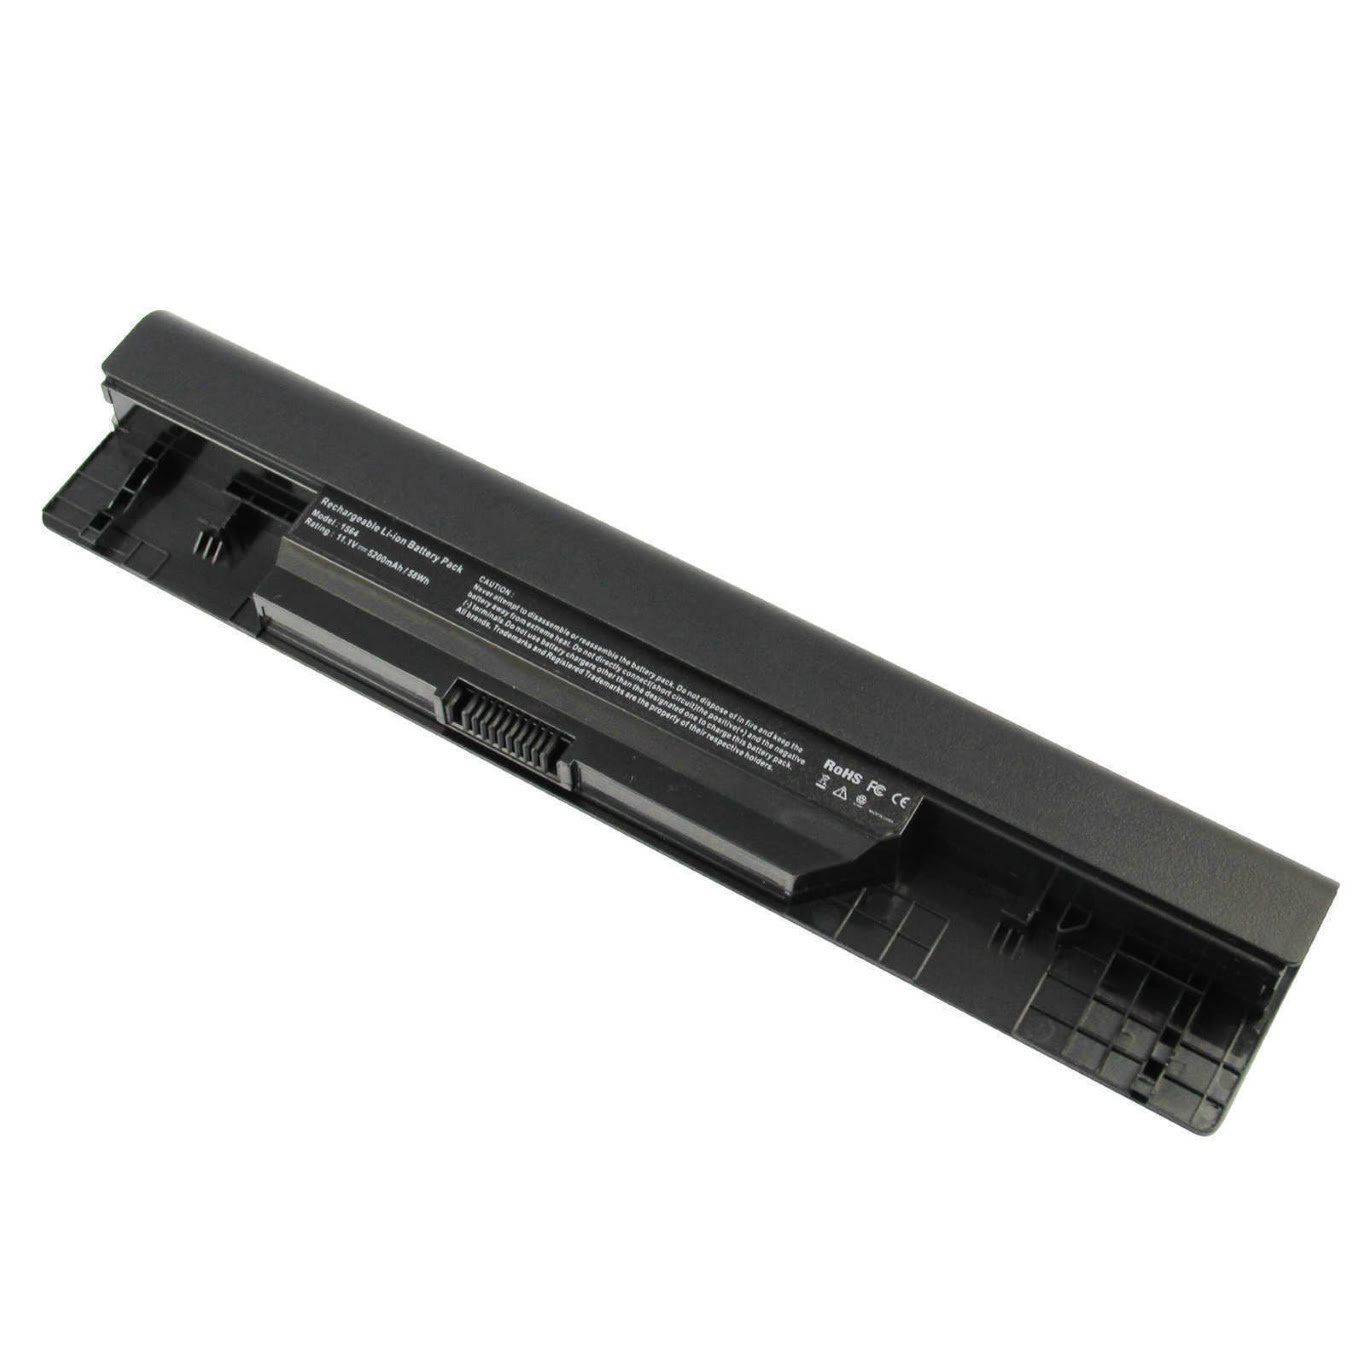 0FH4HR, 0X0WDM replacement Laptop Battery for Dell Inspiron 14, Inspiron 1464, 6 cells, 11.1 V, 5200 Mah